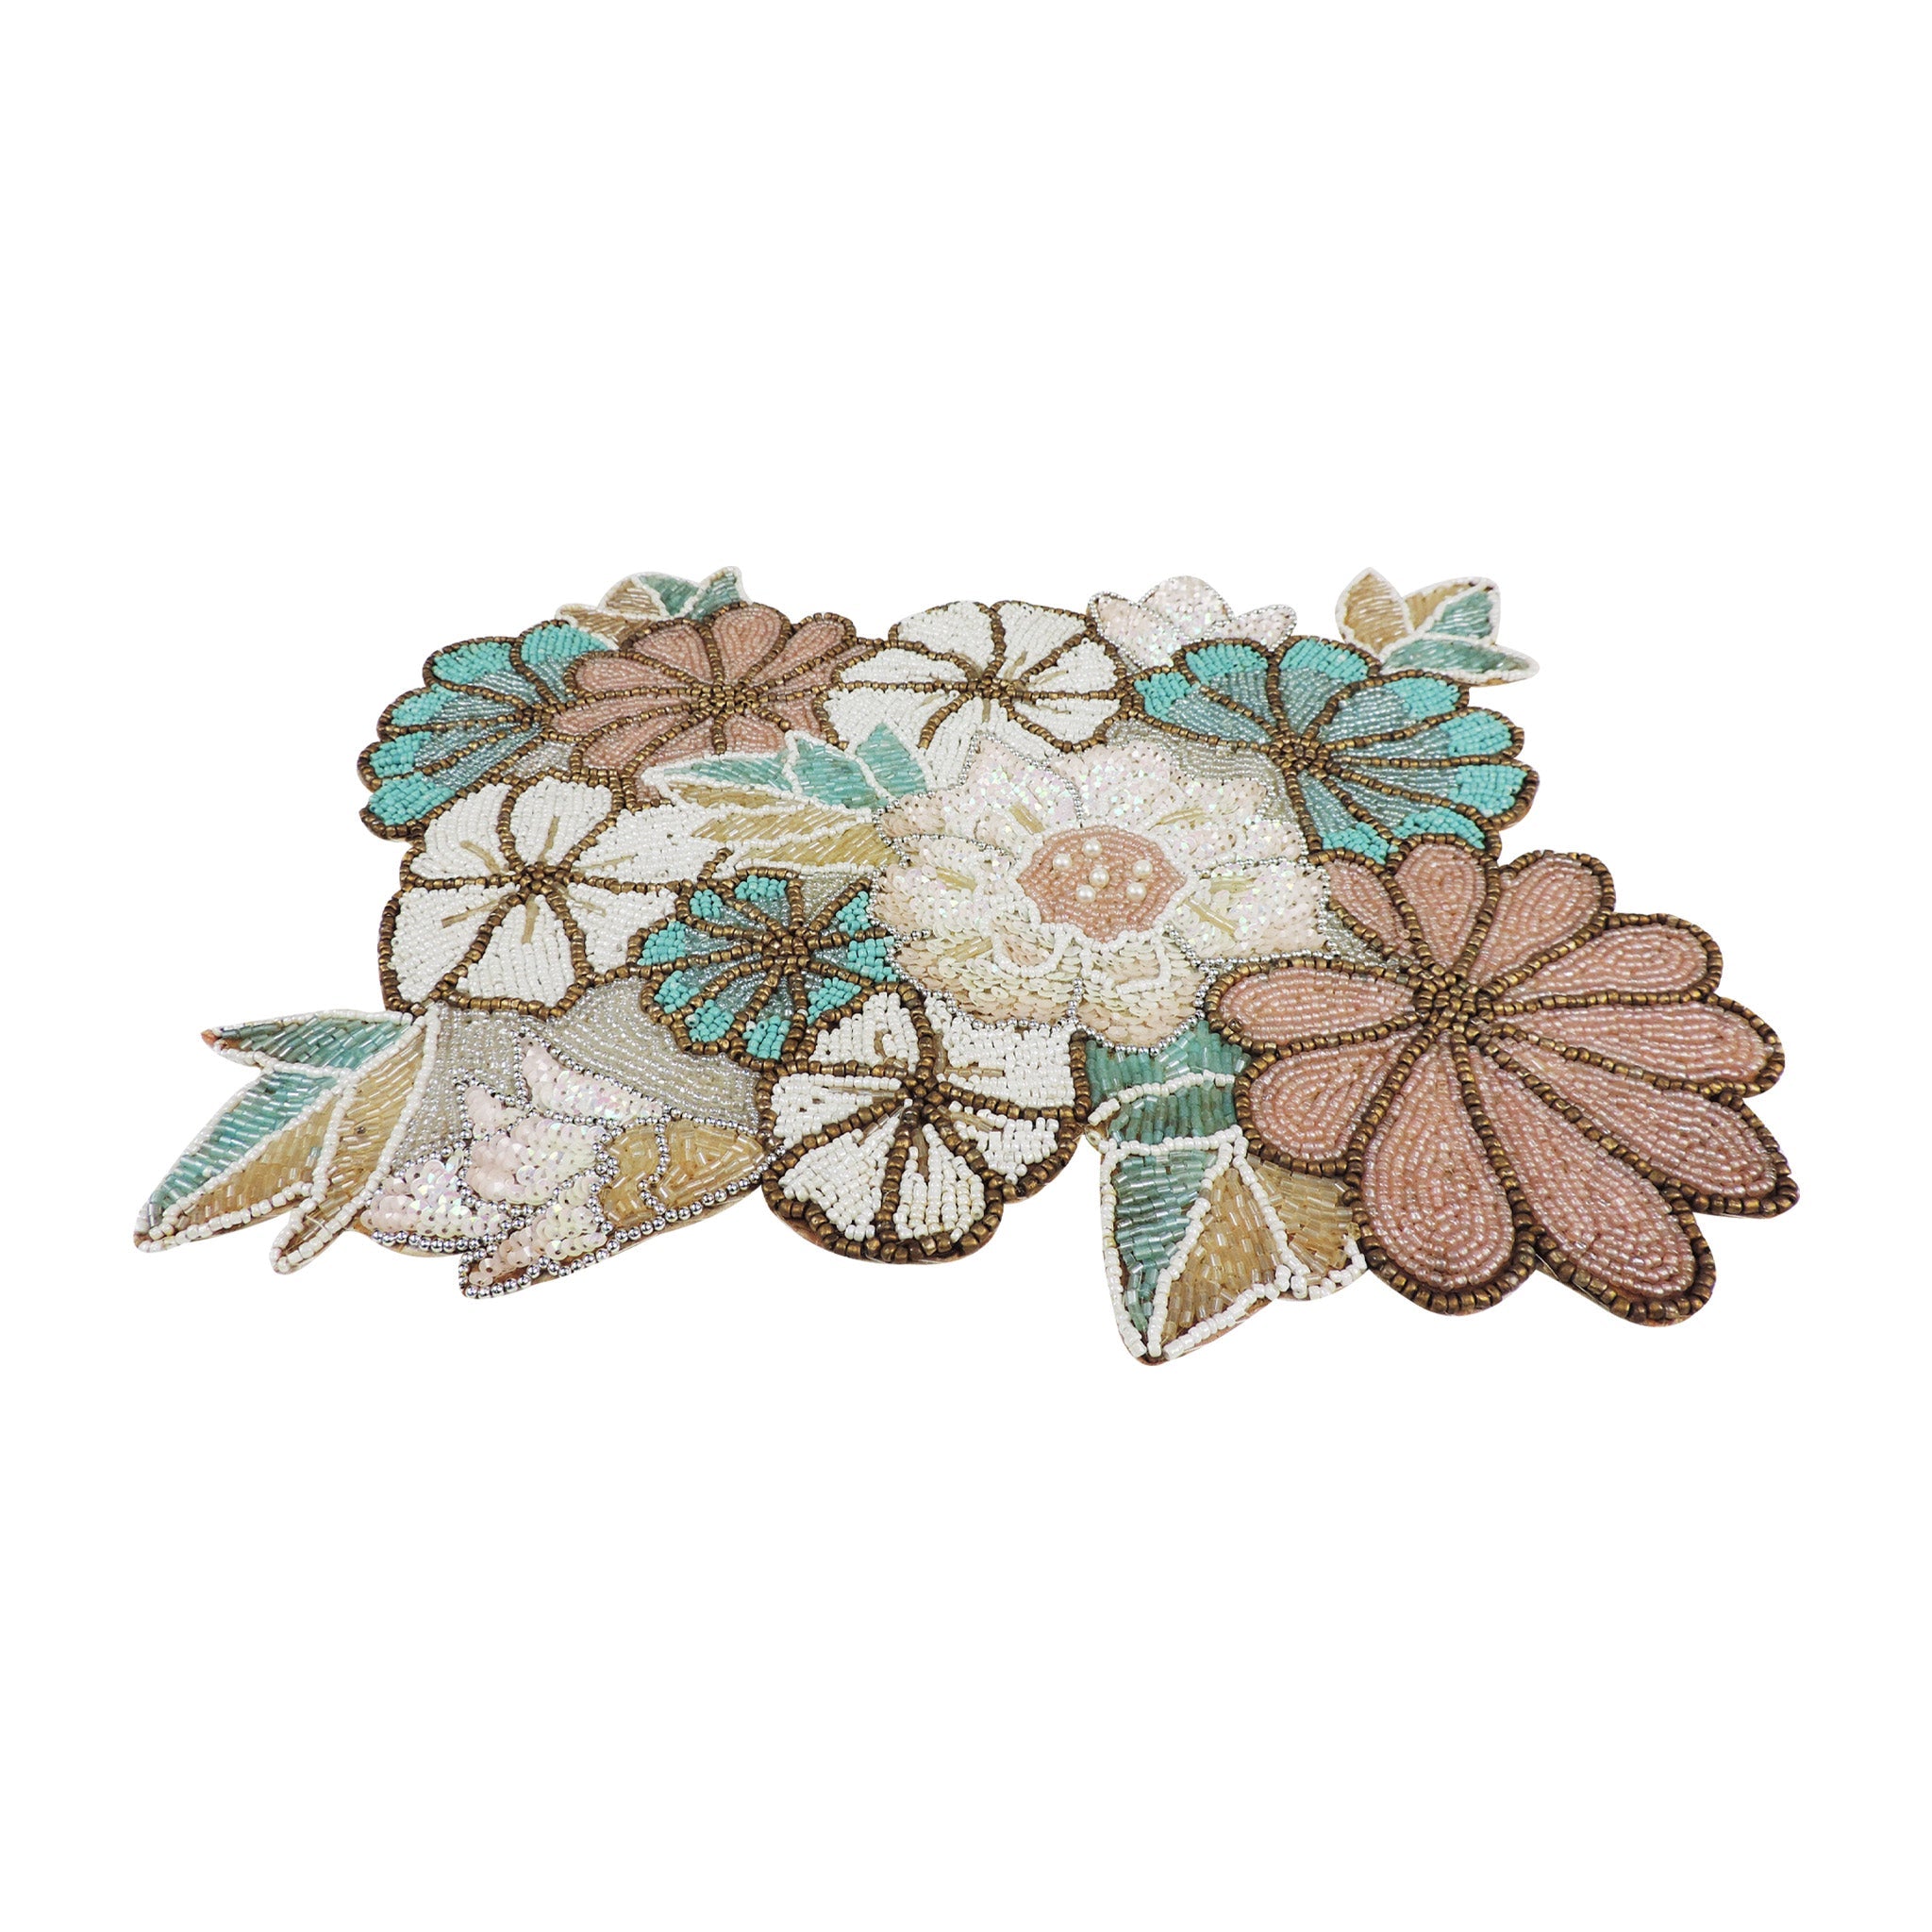 Autumn Blooms Bead Embroidered Placemat in Teal & Grey, Set of 2/4